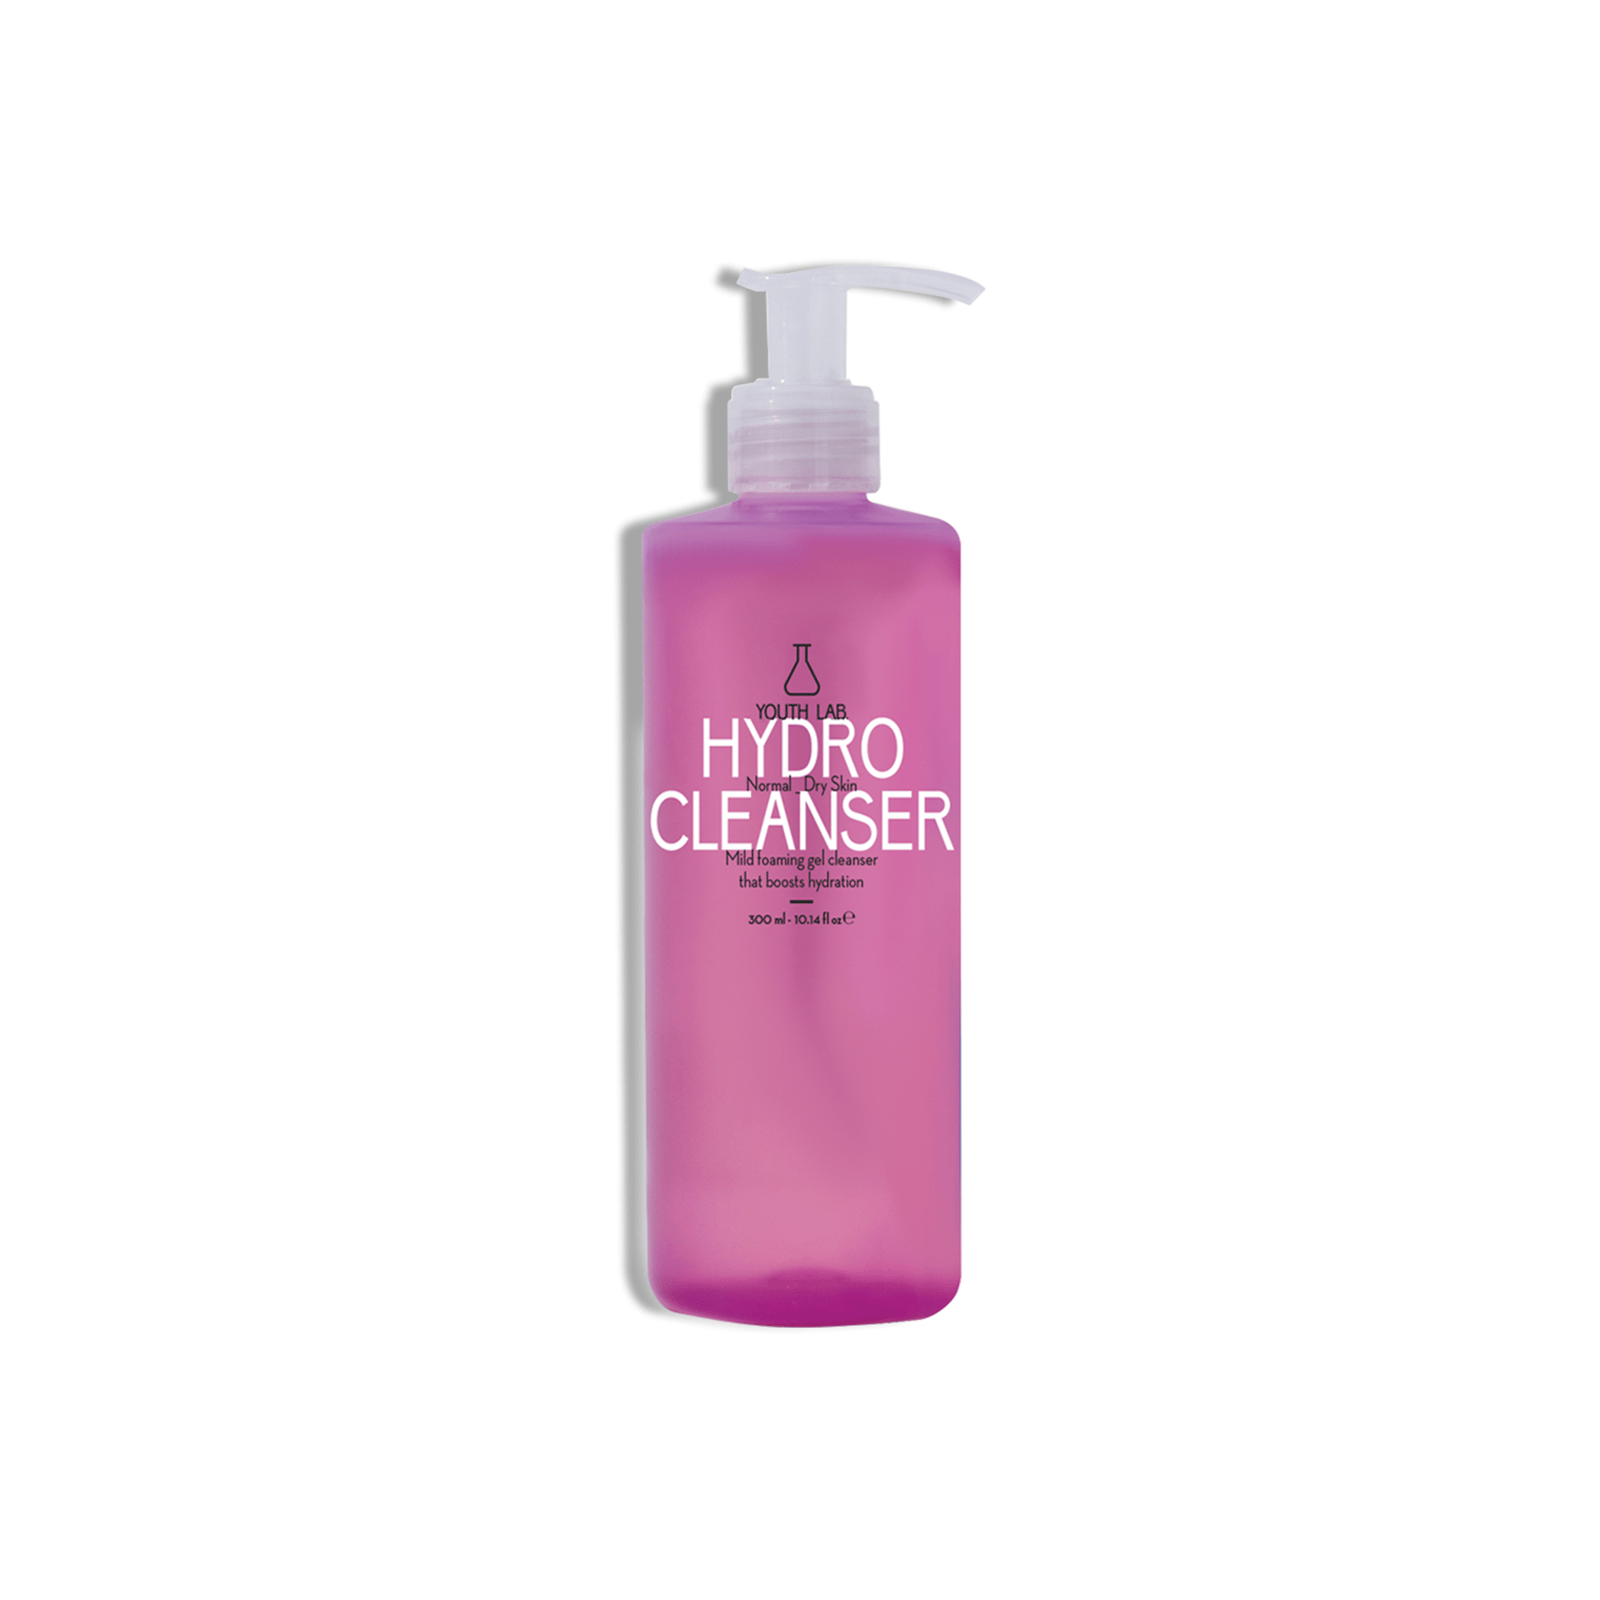 YOUTH LAB Hydro Cleanser 300ml